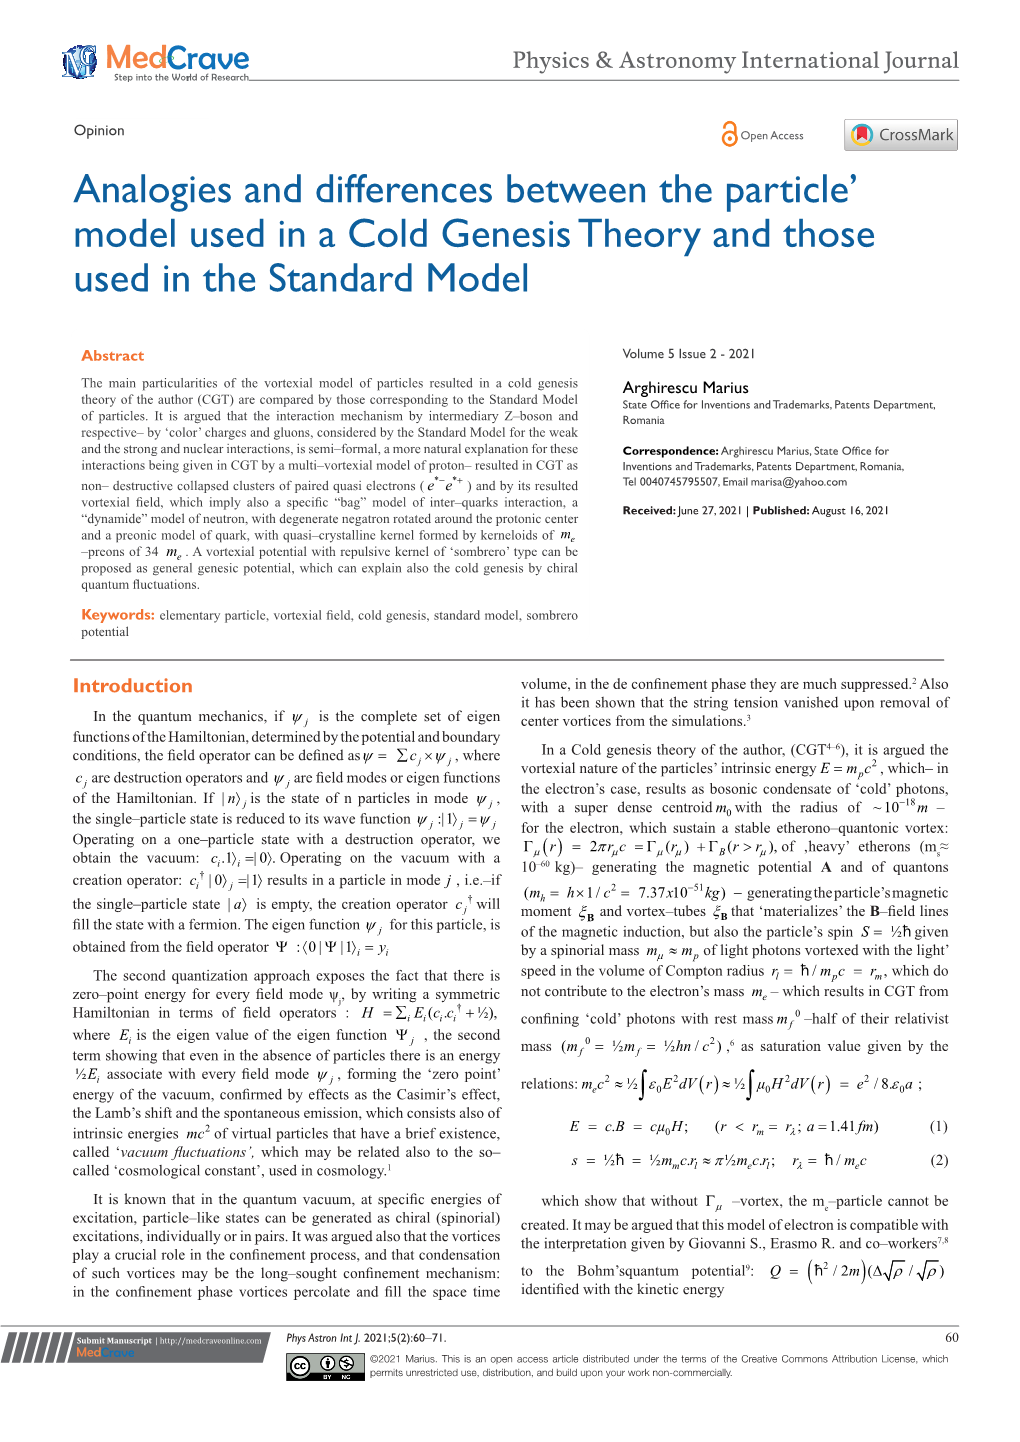 Analogies and Differences Between the Particle' Model Used in a Cold